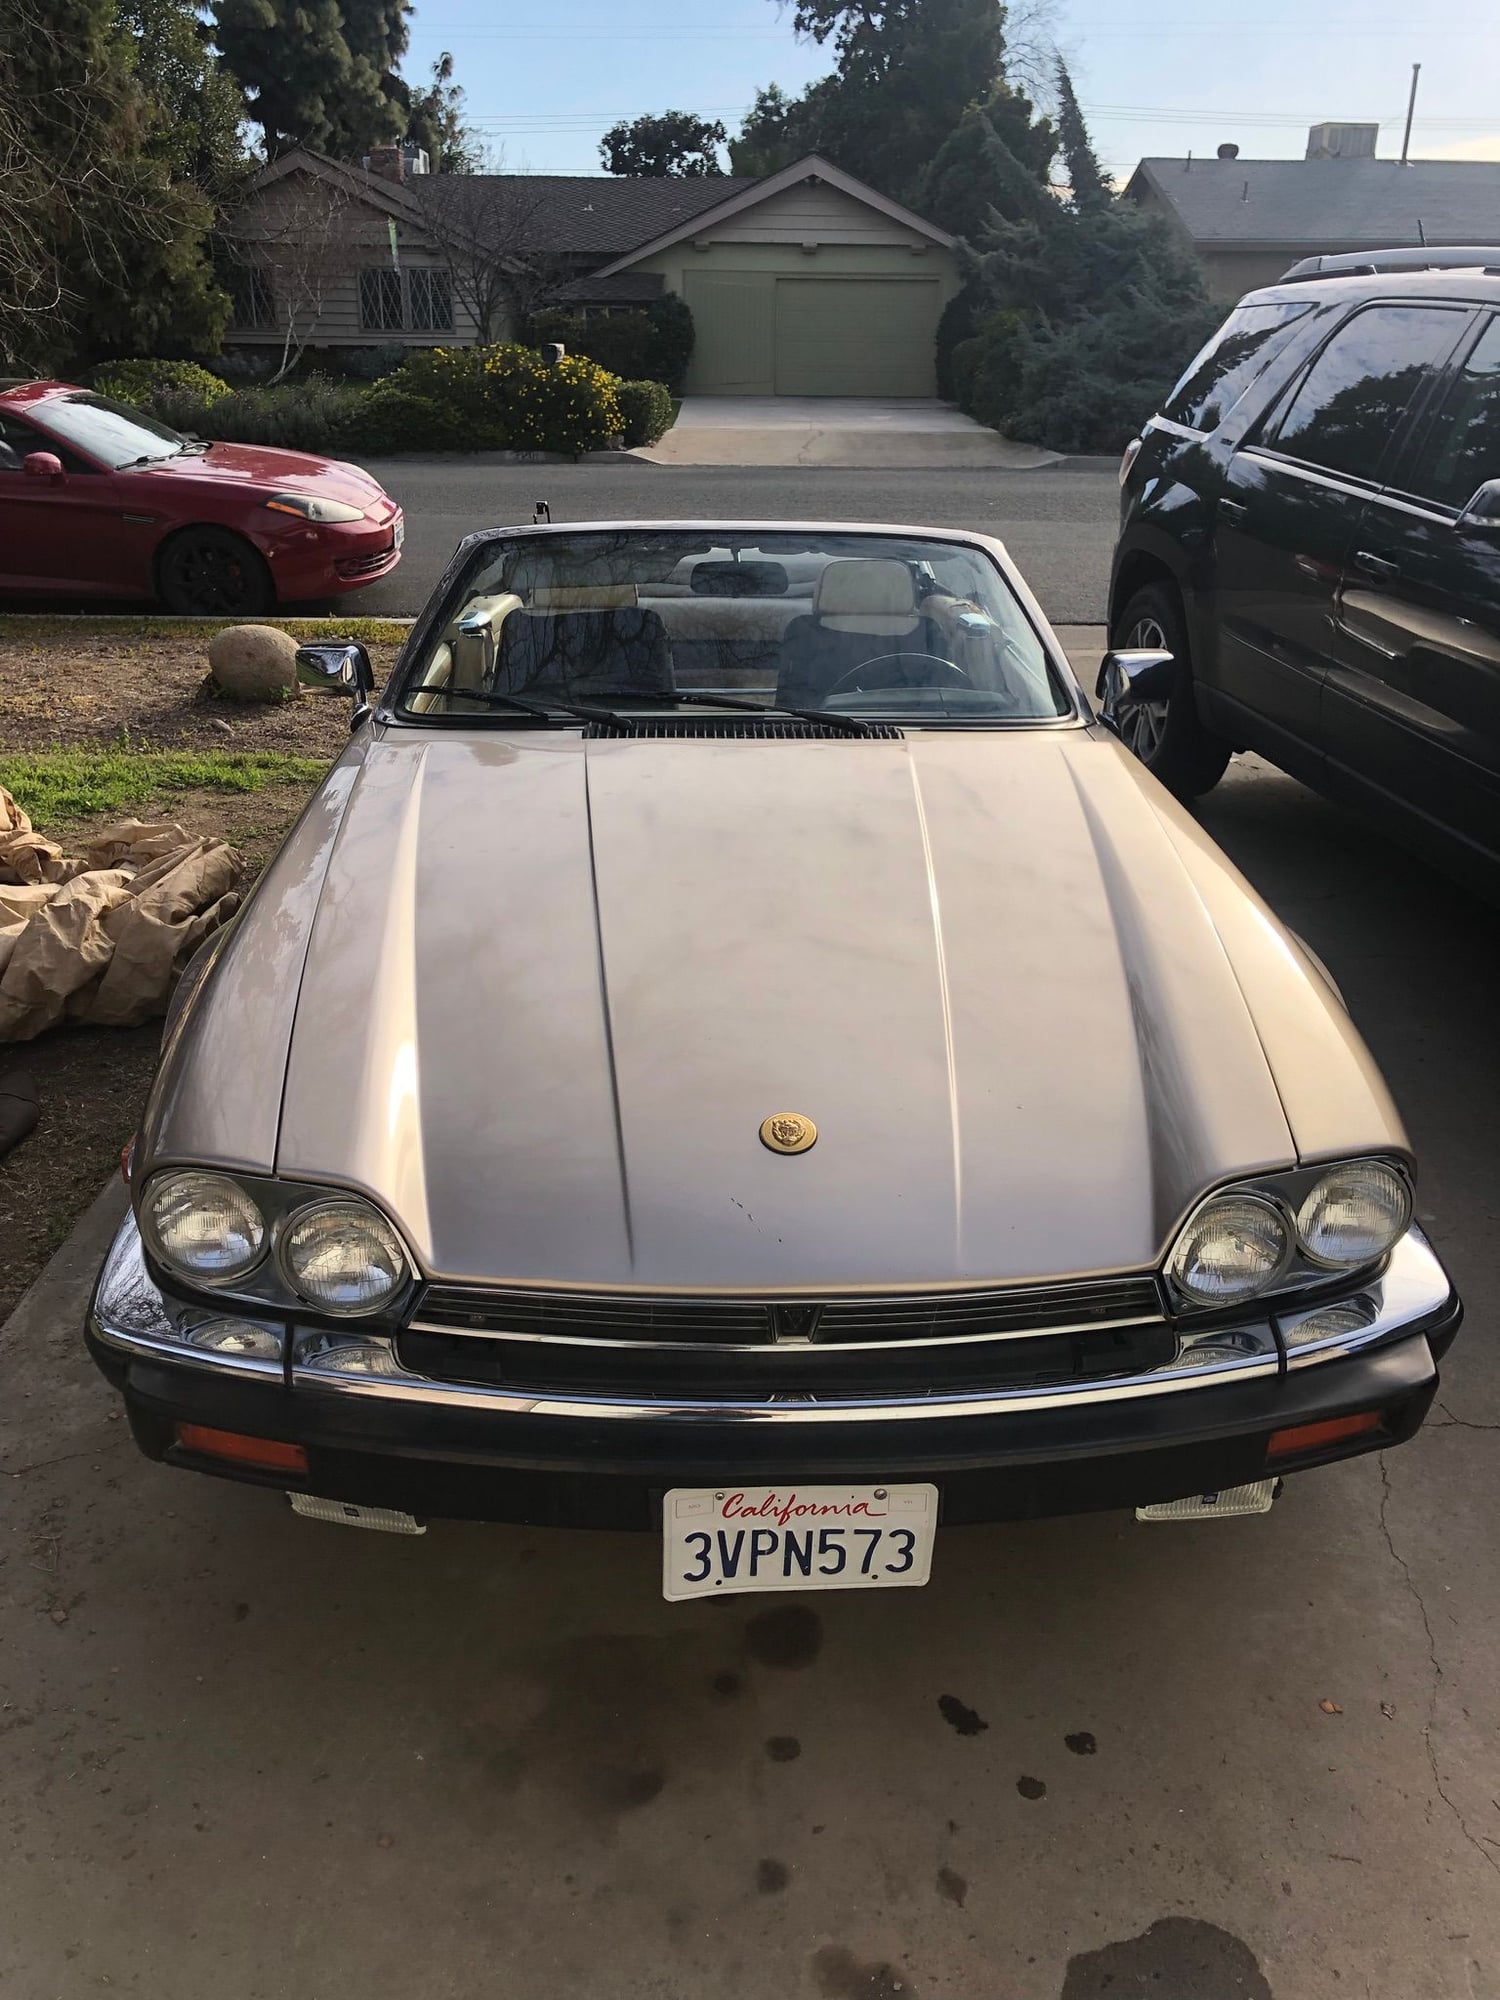 1990 Jaguar XJ12 - 1990 xjs convertible classic collection - Used - VIN Sajtw4845lc176119 - 67,000 Miles - 12 cyl - 2WD - Automatic - Convertible - Gold - Porterville, CA 93257, United States